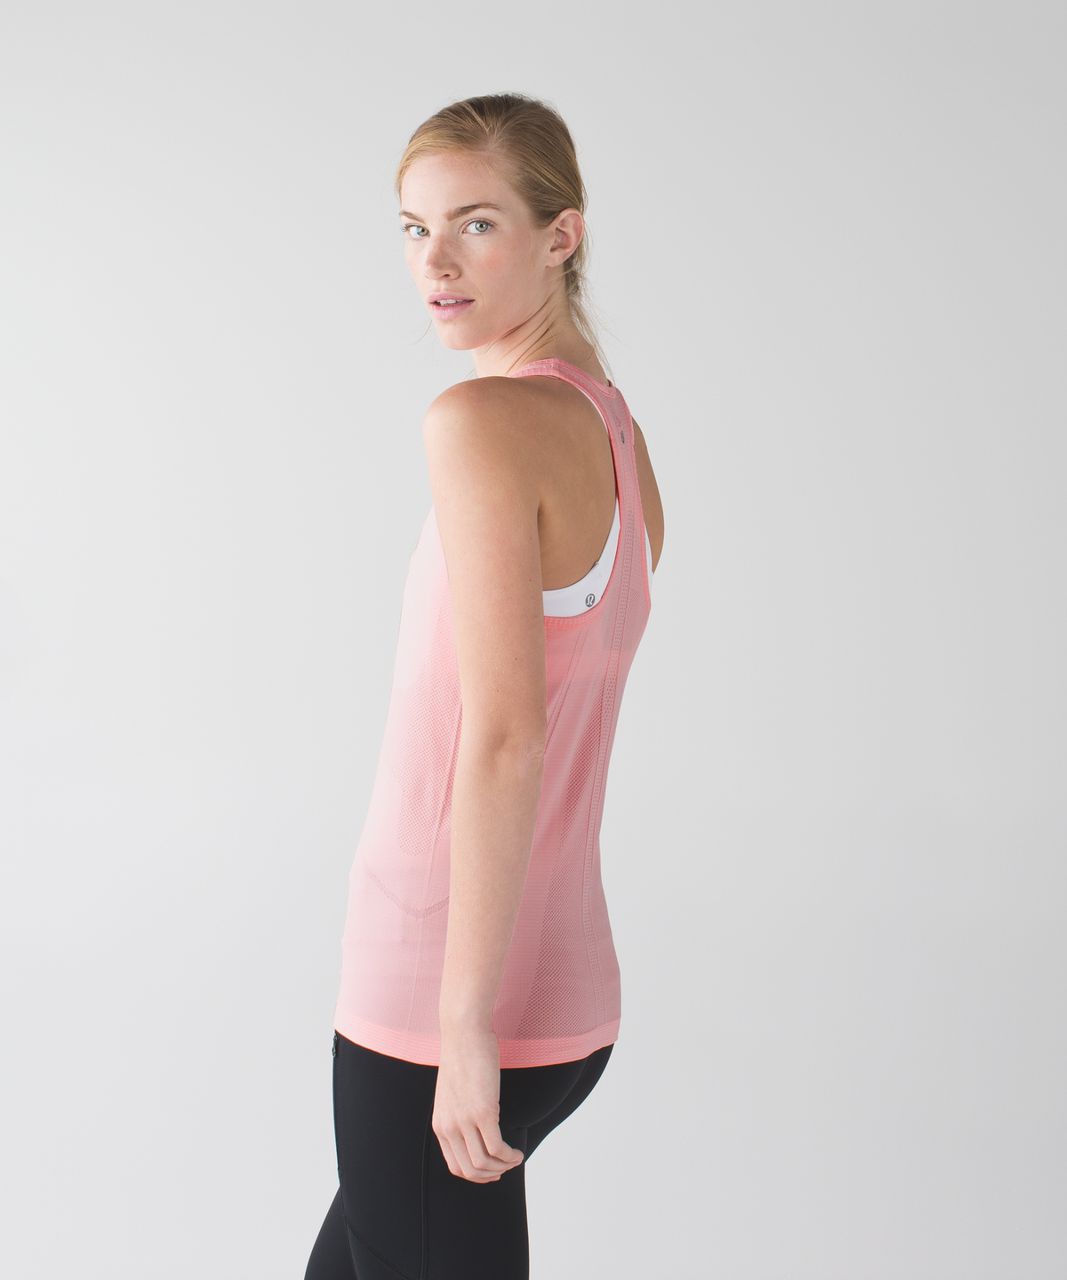 Lululemon Swiftly Tech Racerback - Heathered Bleached Coral